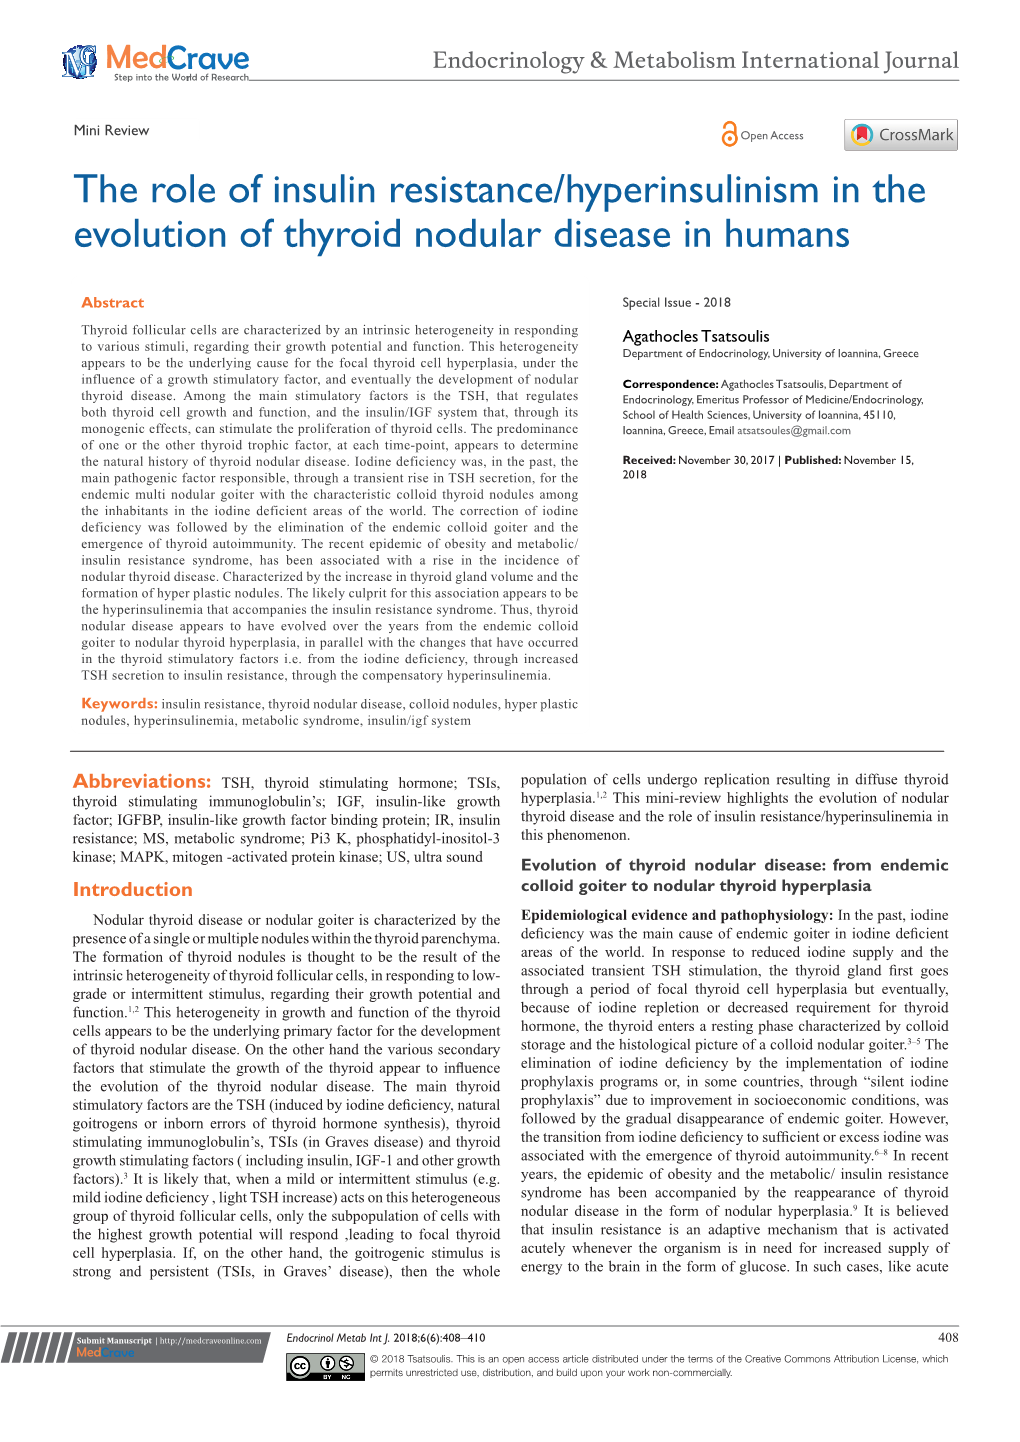 The Role of Insulin Resistance/Hyperinsulinism in the Evolution of Thyroid Nodular Disease in Humans